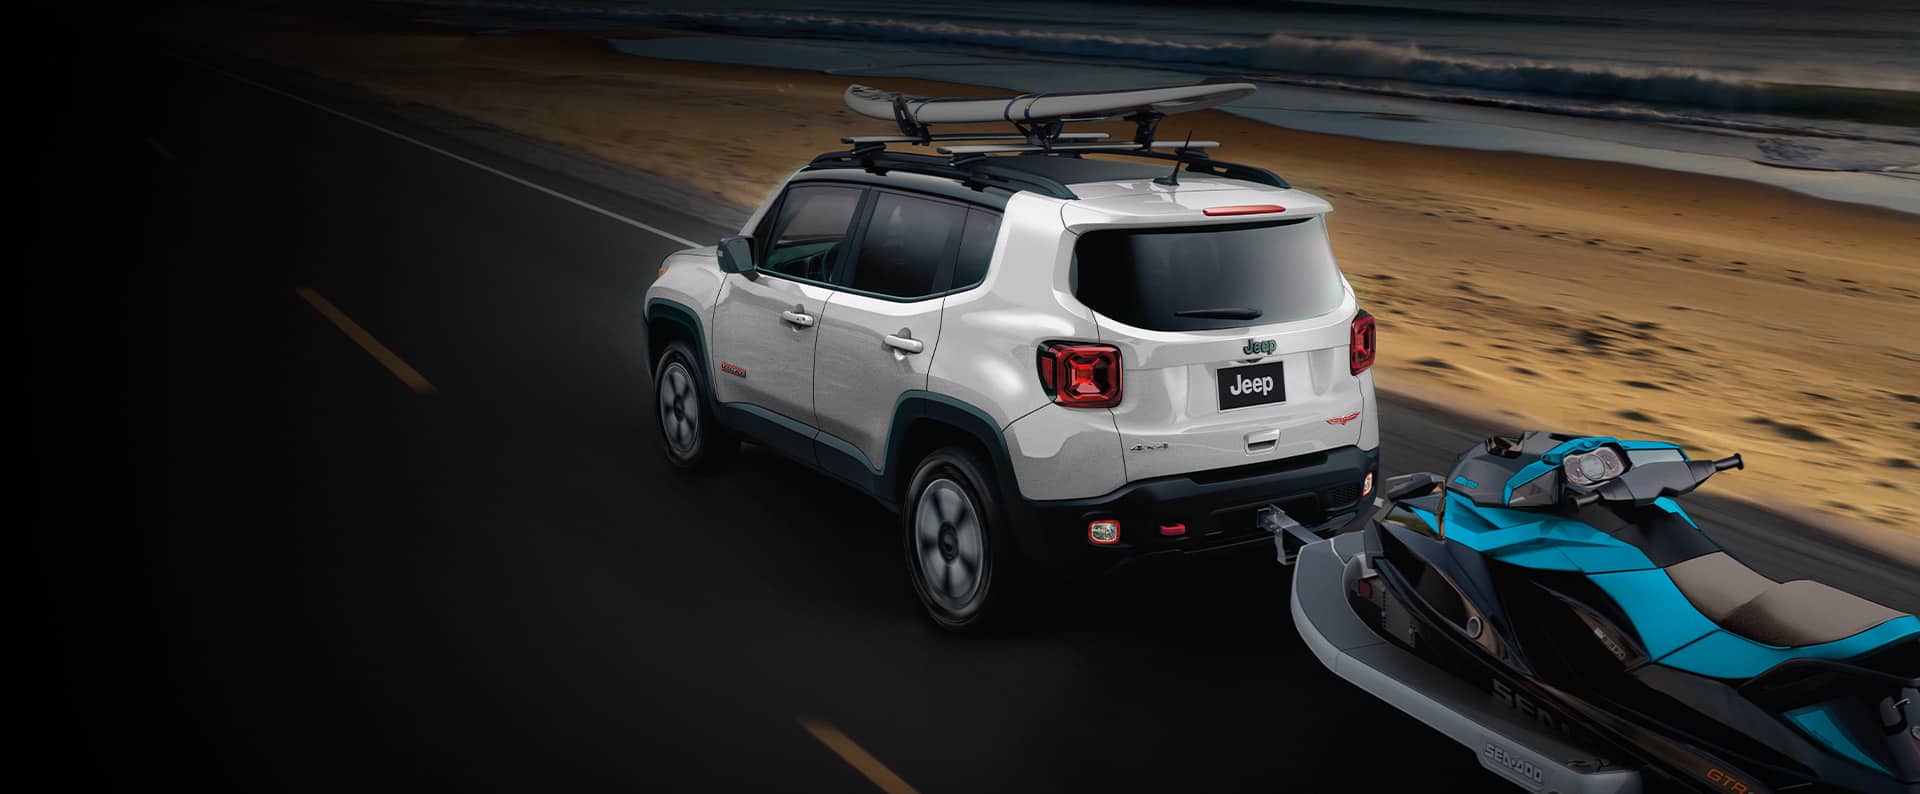 The 2022 Jeep Renegade towing a personal watercraft on a trailer while carrying a surfboard on its roof rack.